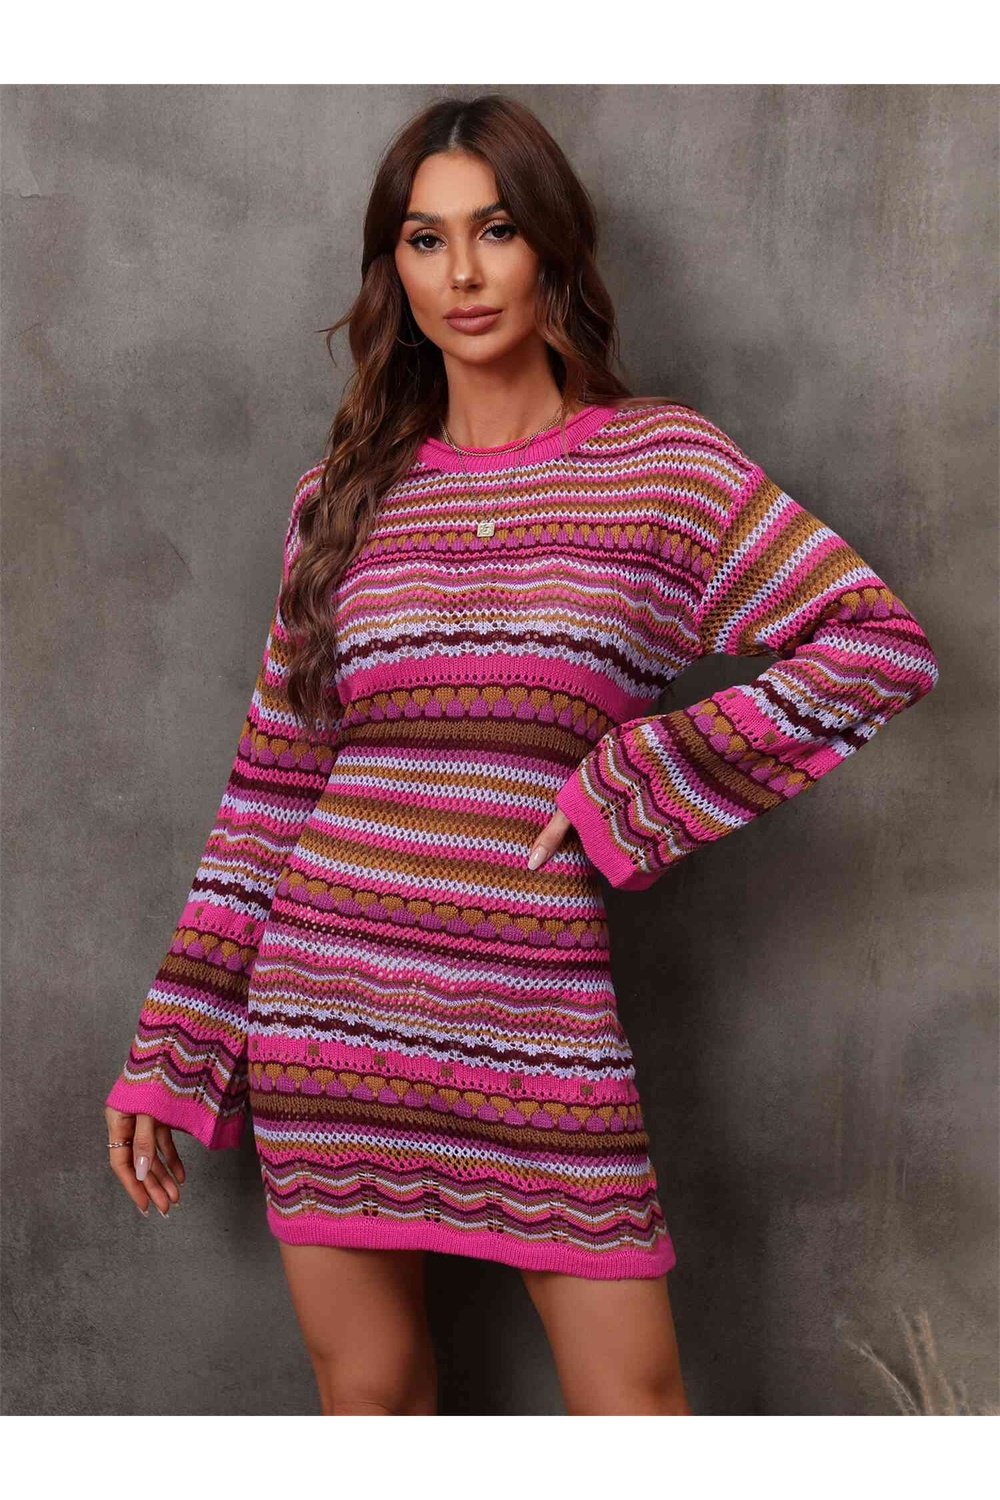 Multicolored Stripe Dropped Shoulder Sweater Dress - Sweater Dresses - FITGGINS